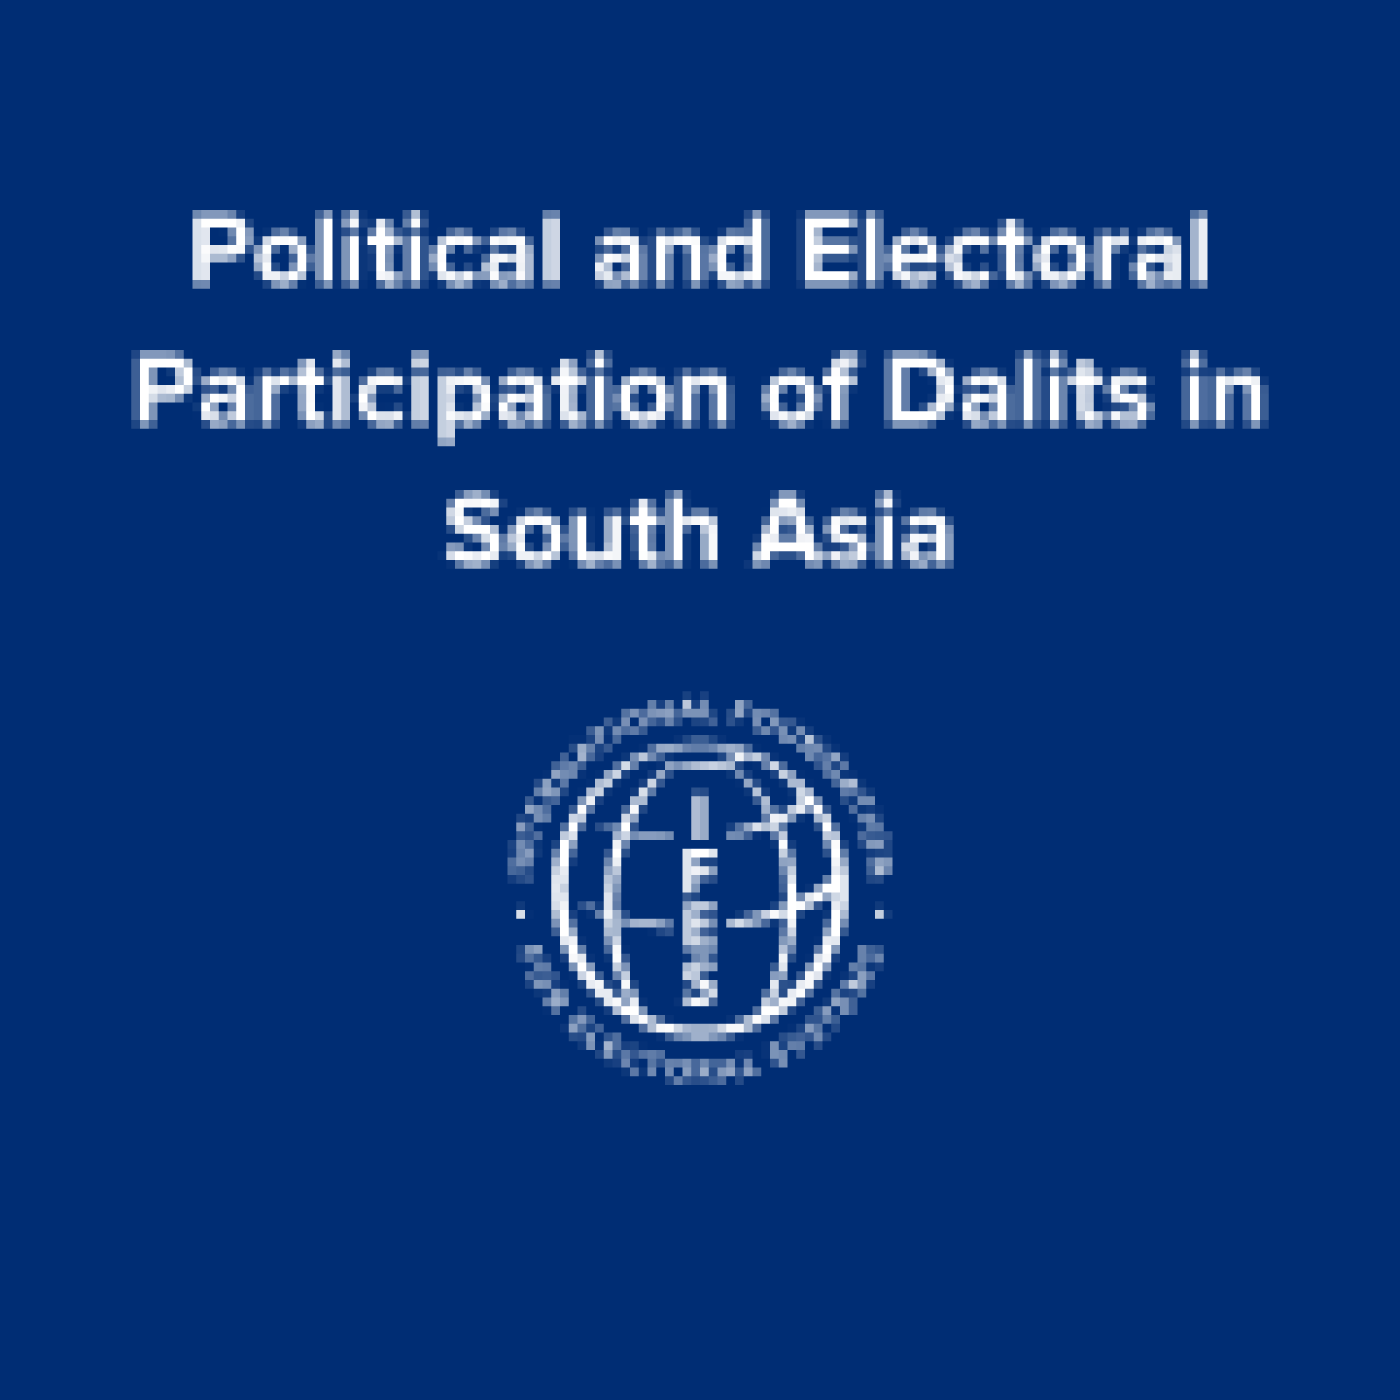 Political and Electoral Participation of Dalits in South Asia IFES Logo